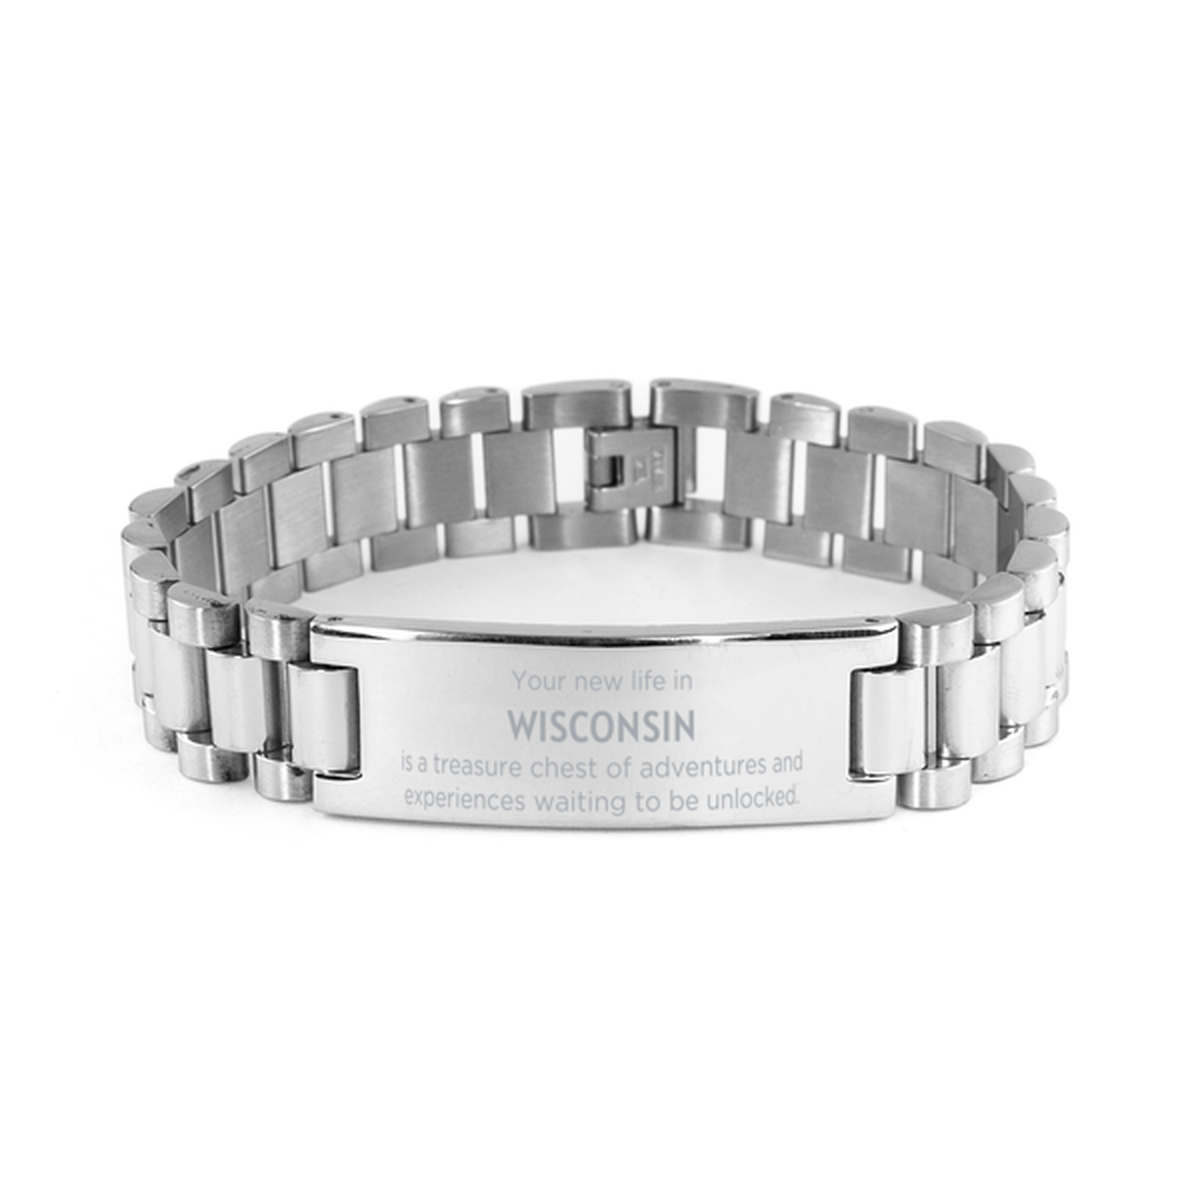 Moving to Wisconsin Gifts, Your new life in Wisconsin, Long Distance Wisconsin Christmas Ladder Stainless Steel Bracelet For Men, Women, Friends, Coworkers